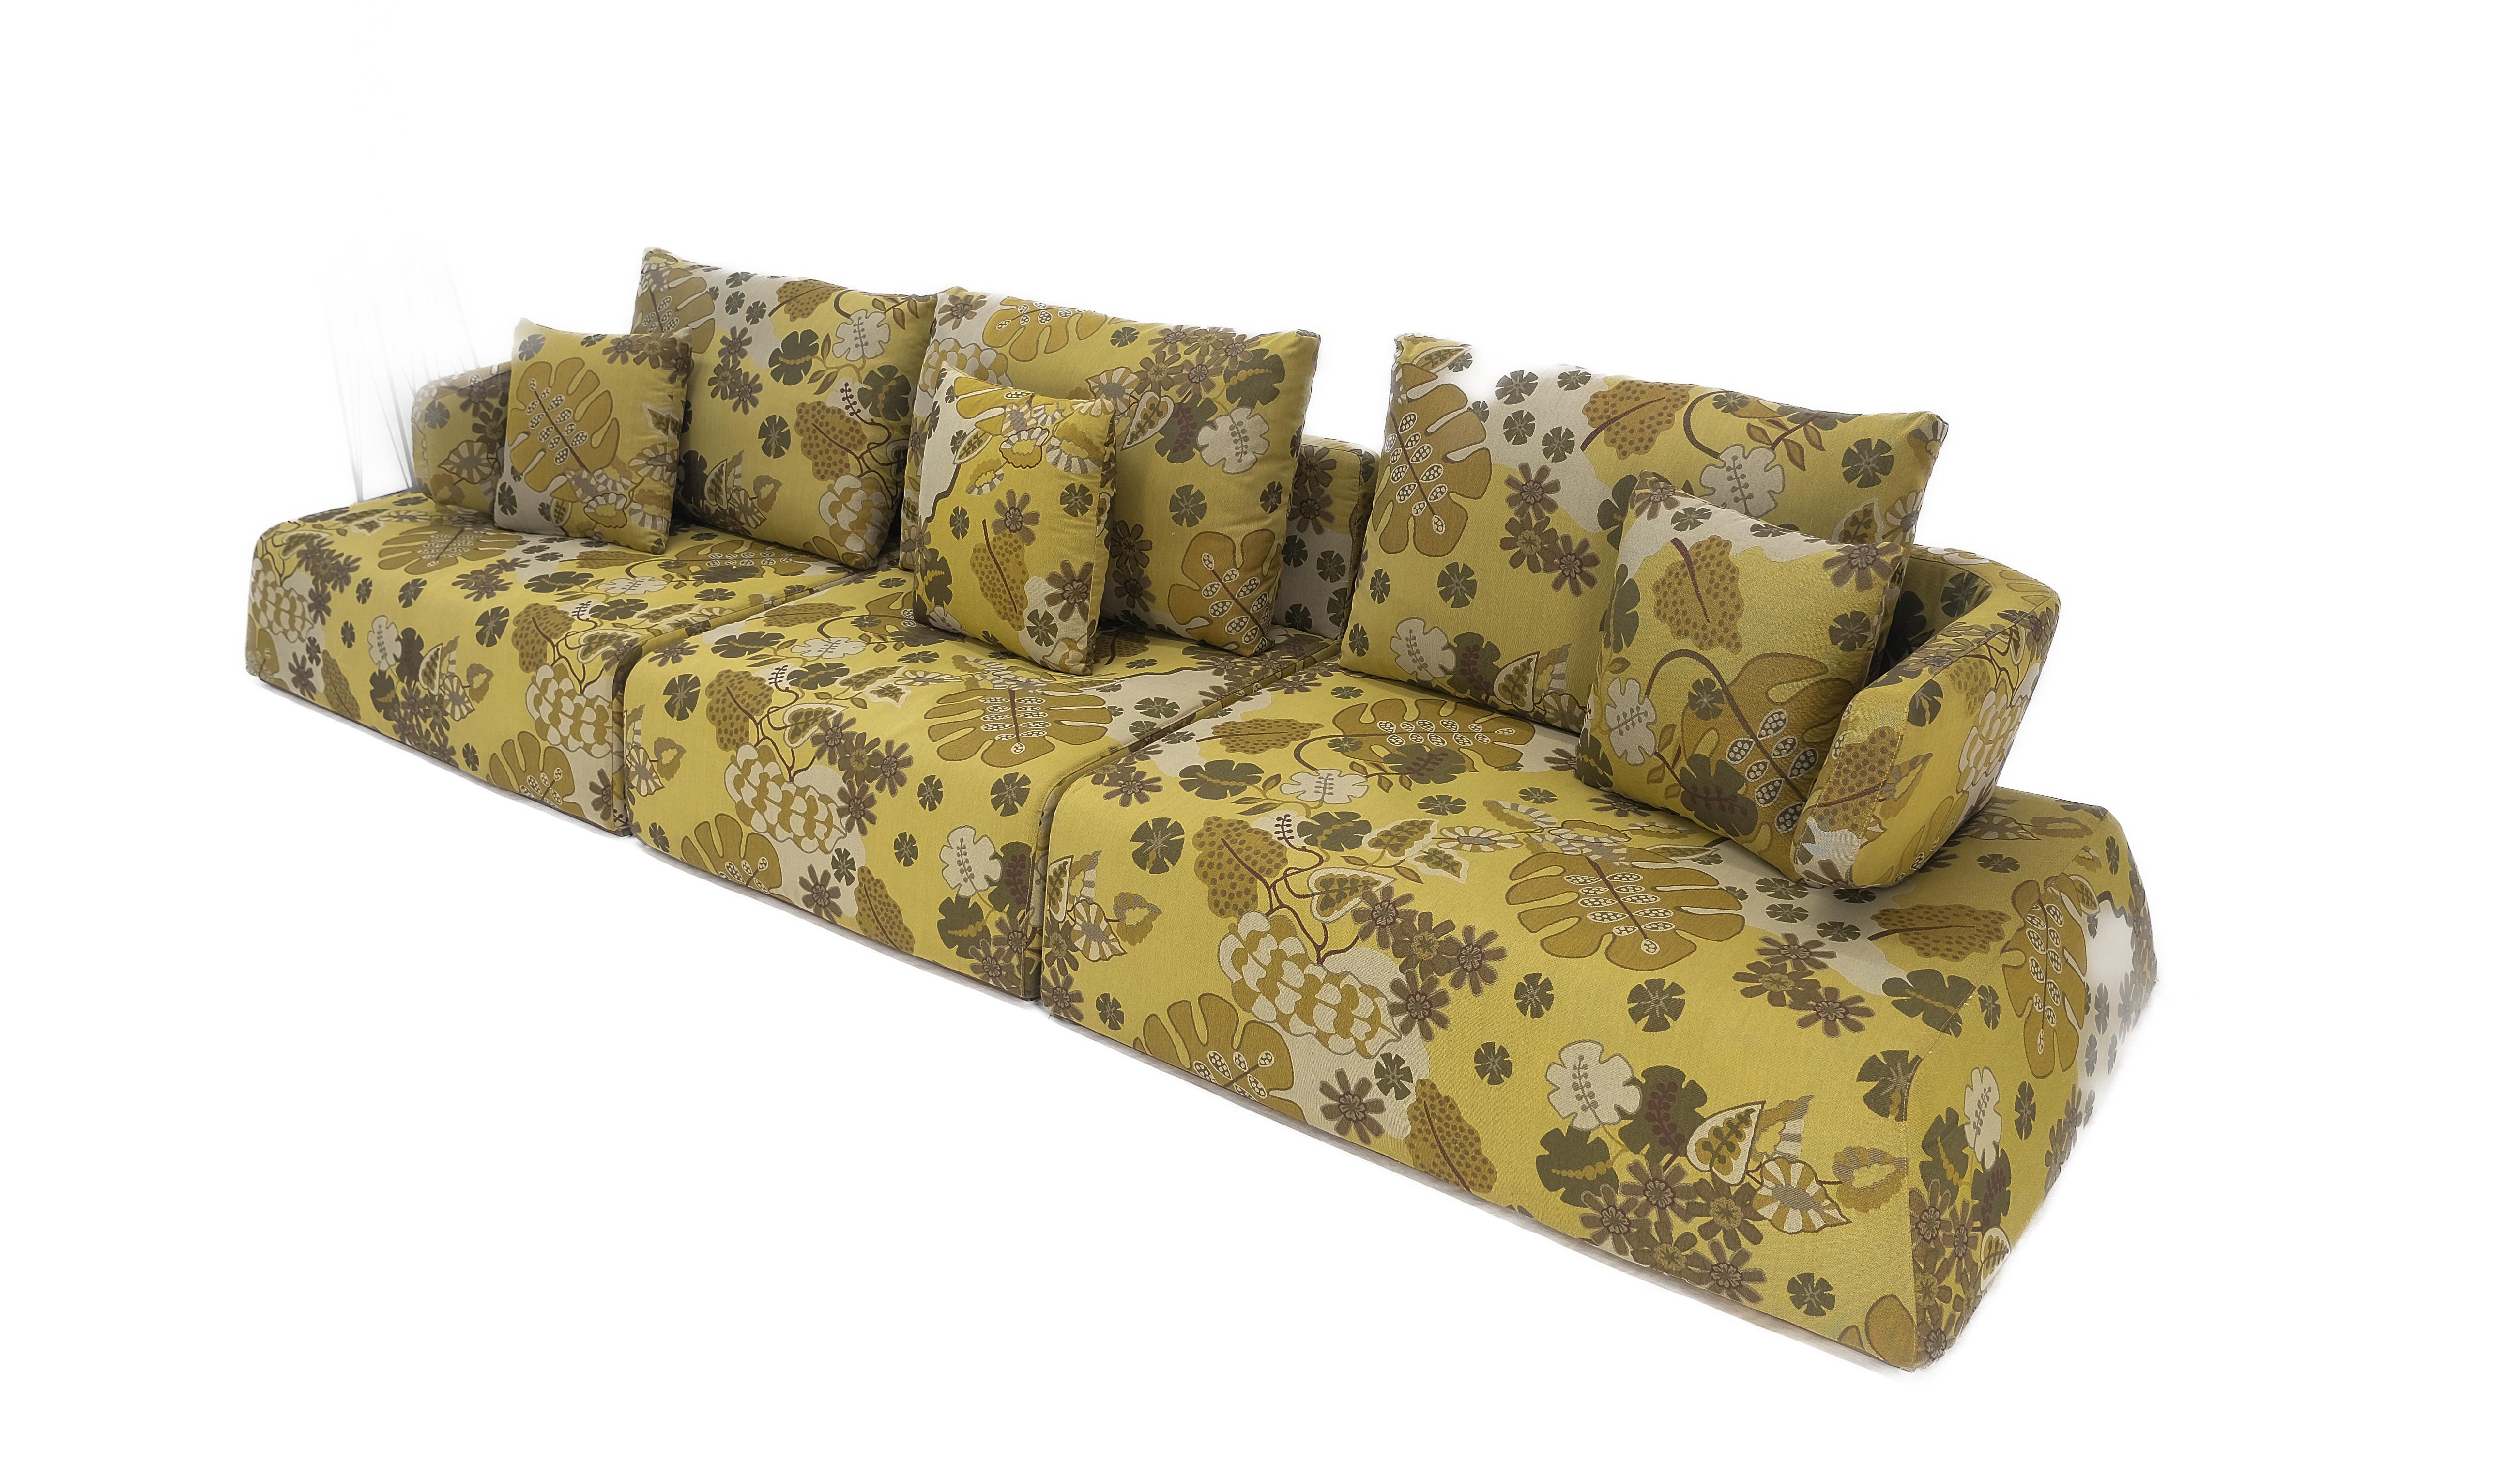 Mid Century Modern Green Floral Pattern Upholstery Low Sitter Sofa on Platform  In Good Condition For Sale In Rockaway, NJ